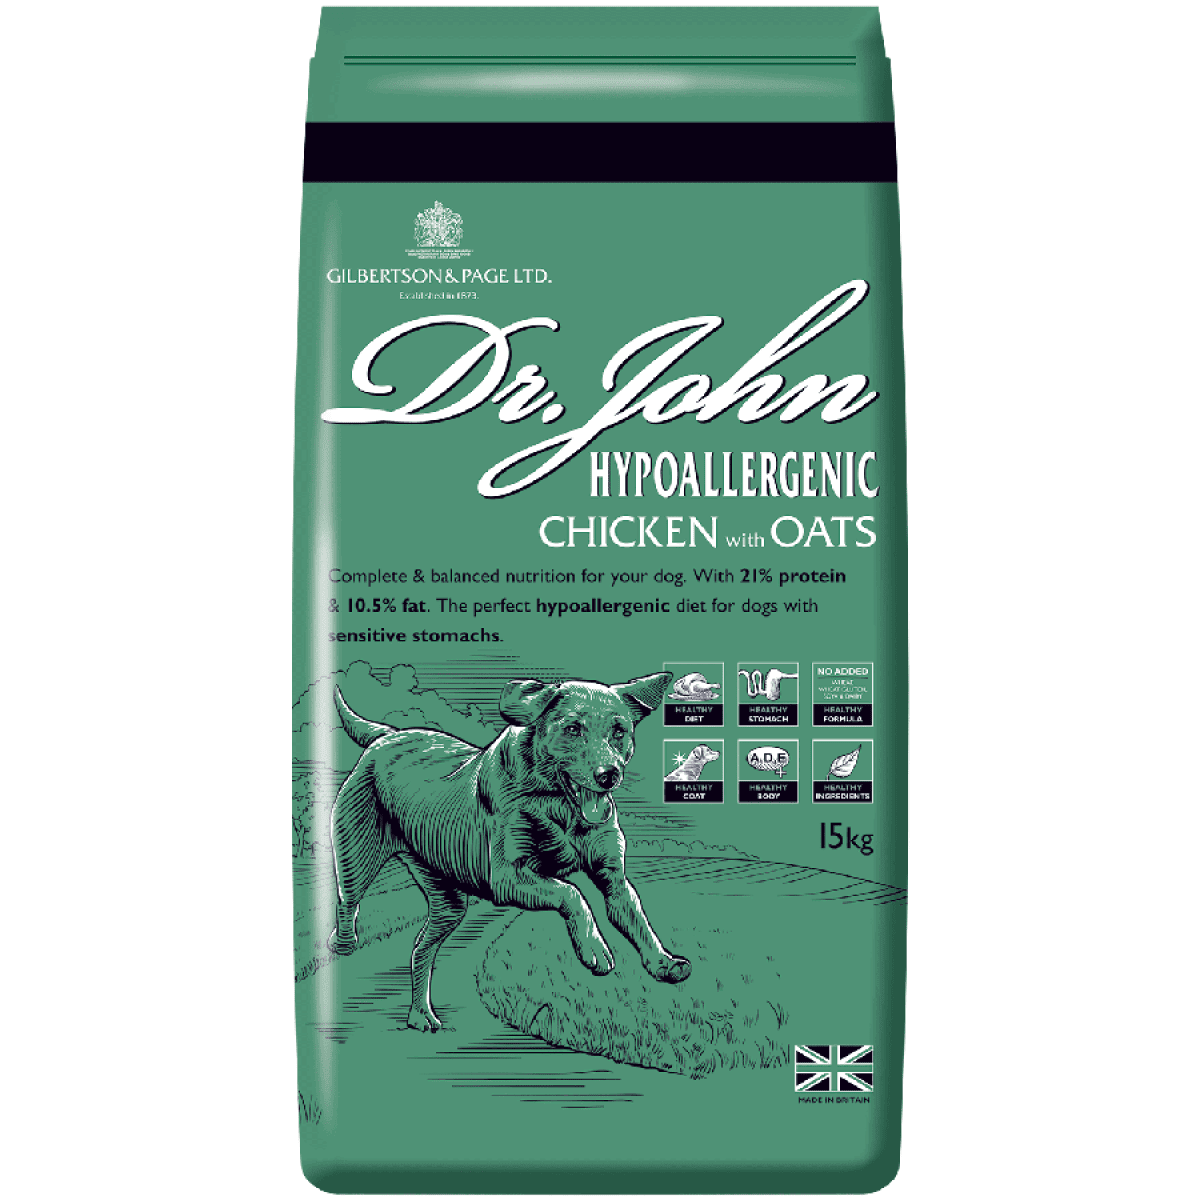 Dr John Hypoallergenic Chicken 15kg – Pawfect Supplies Ltd Product Image